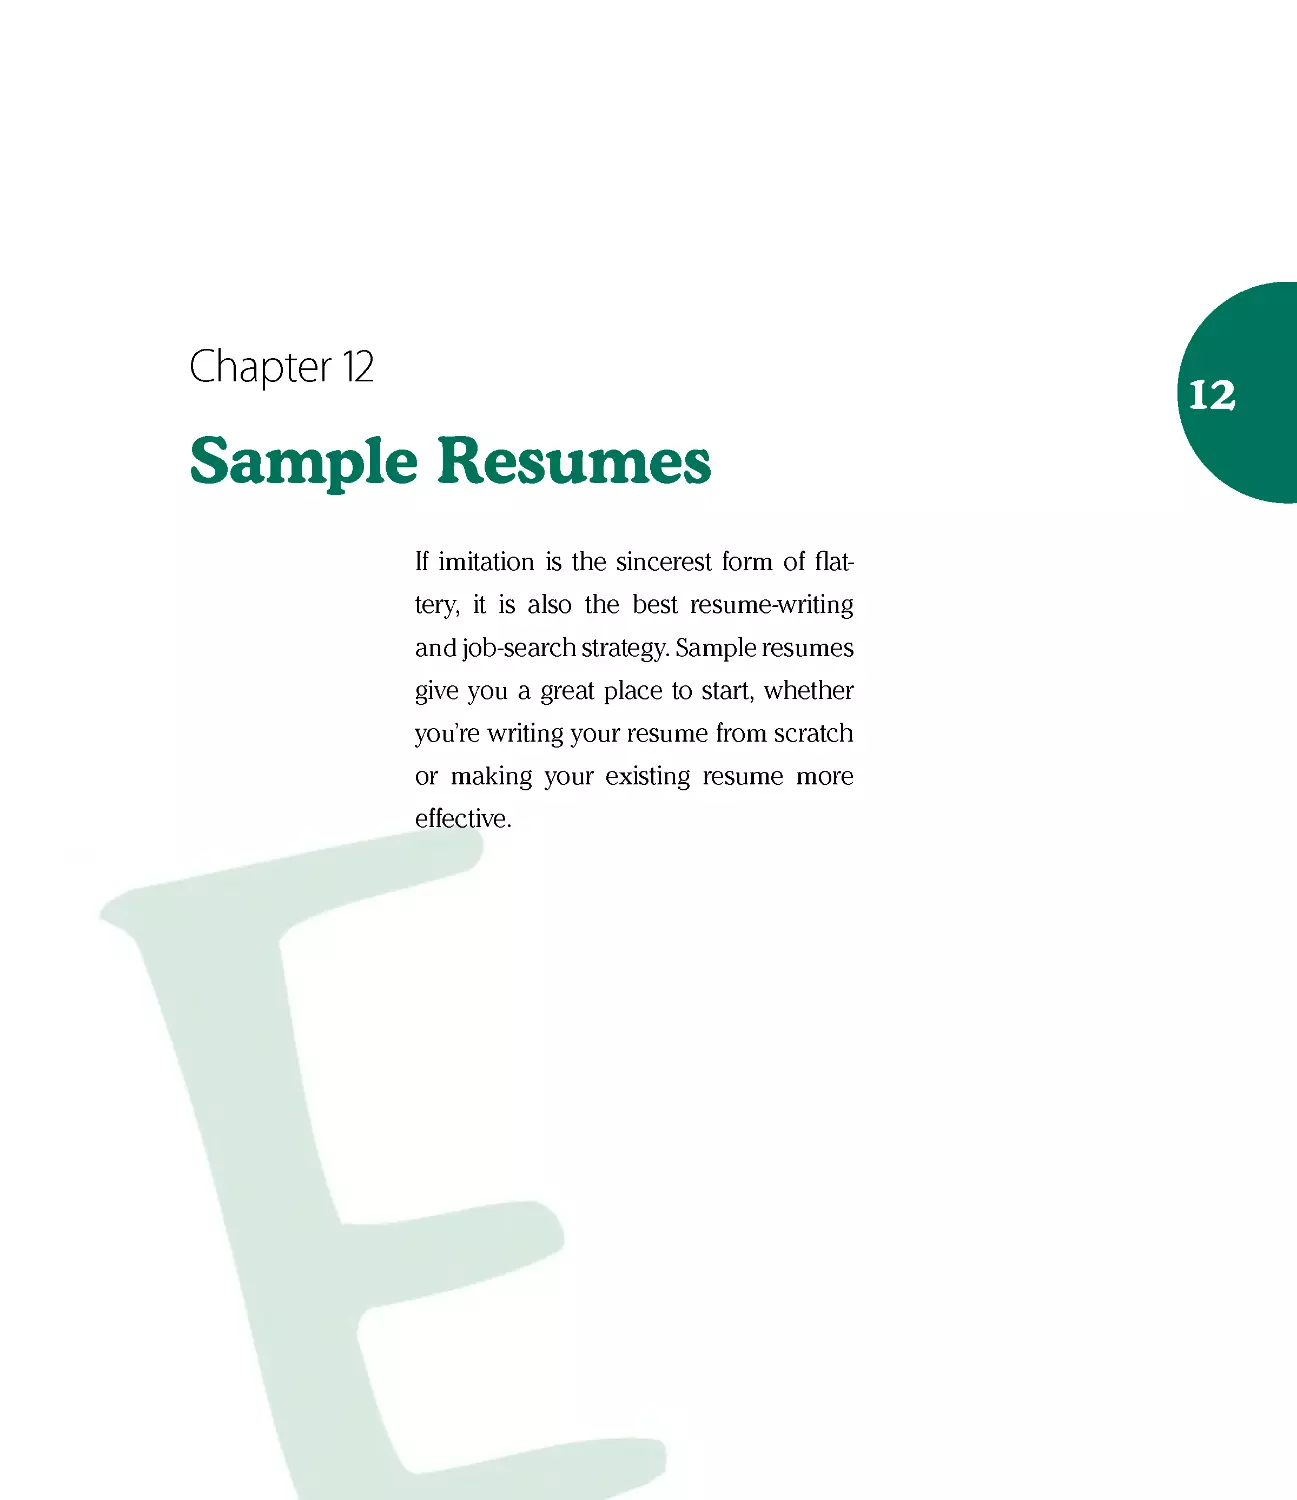 Chapter 12: Sample Resumes